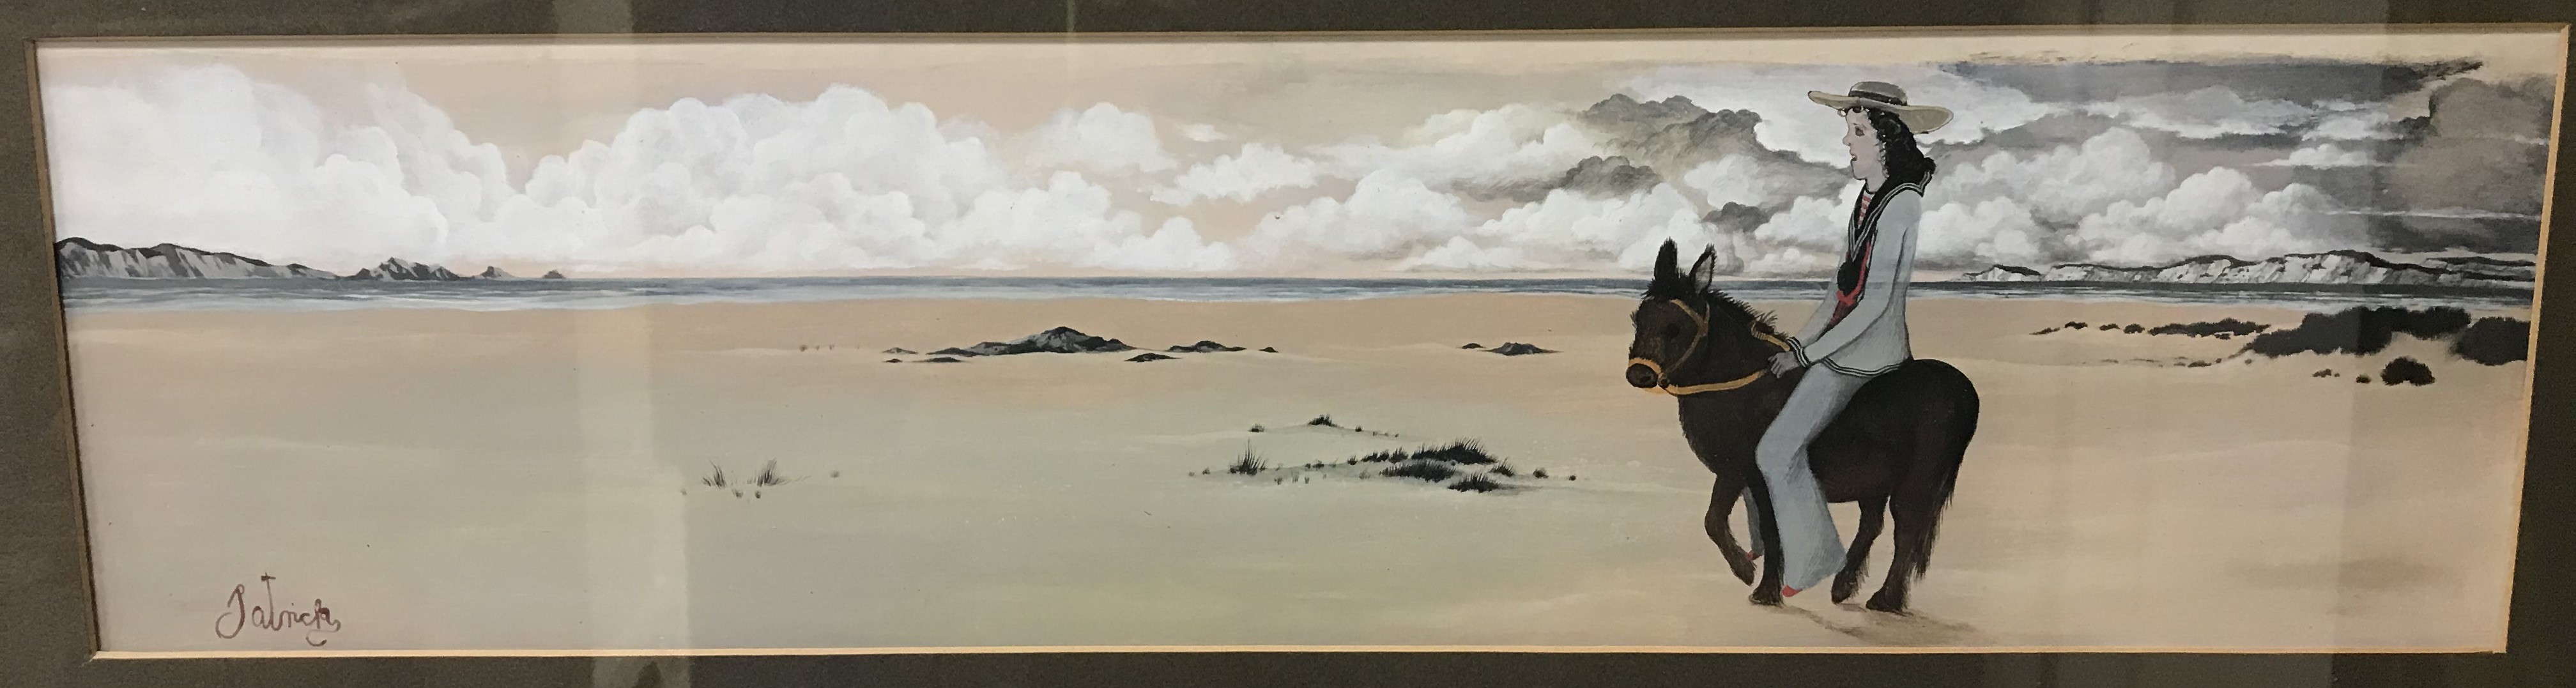 PATRICK "Study of a man in sailor's outfit riding a donkey on beach" watercolour, signed lower left, - Image 2 of 4